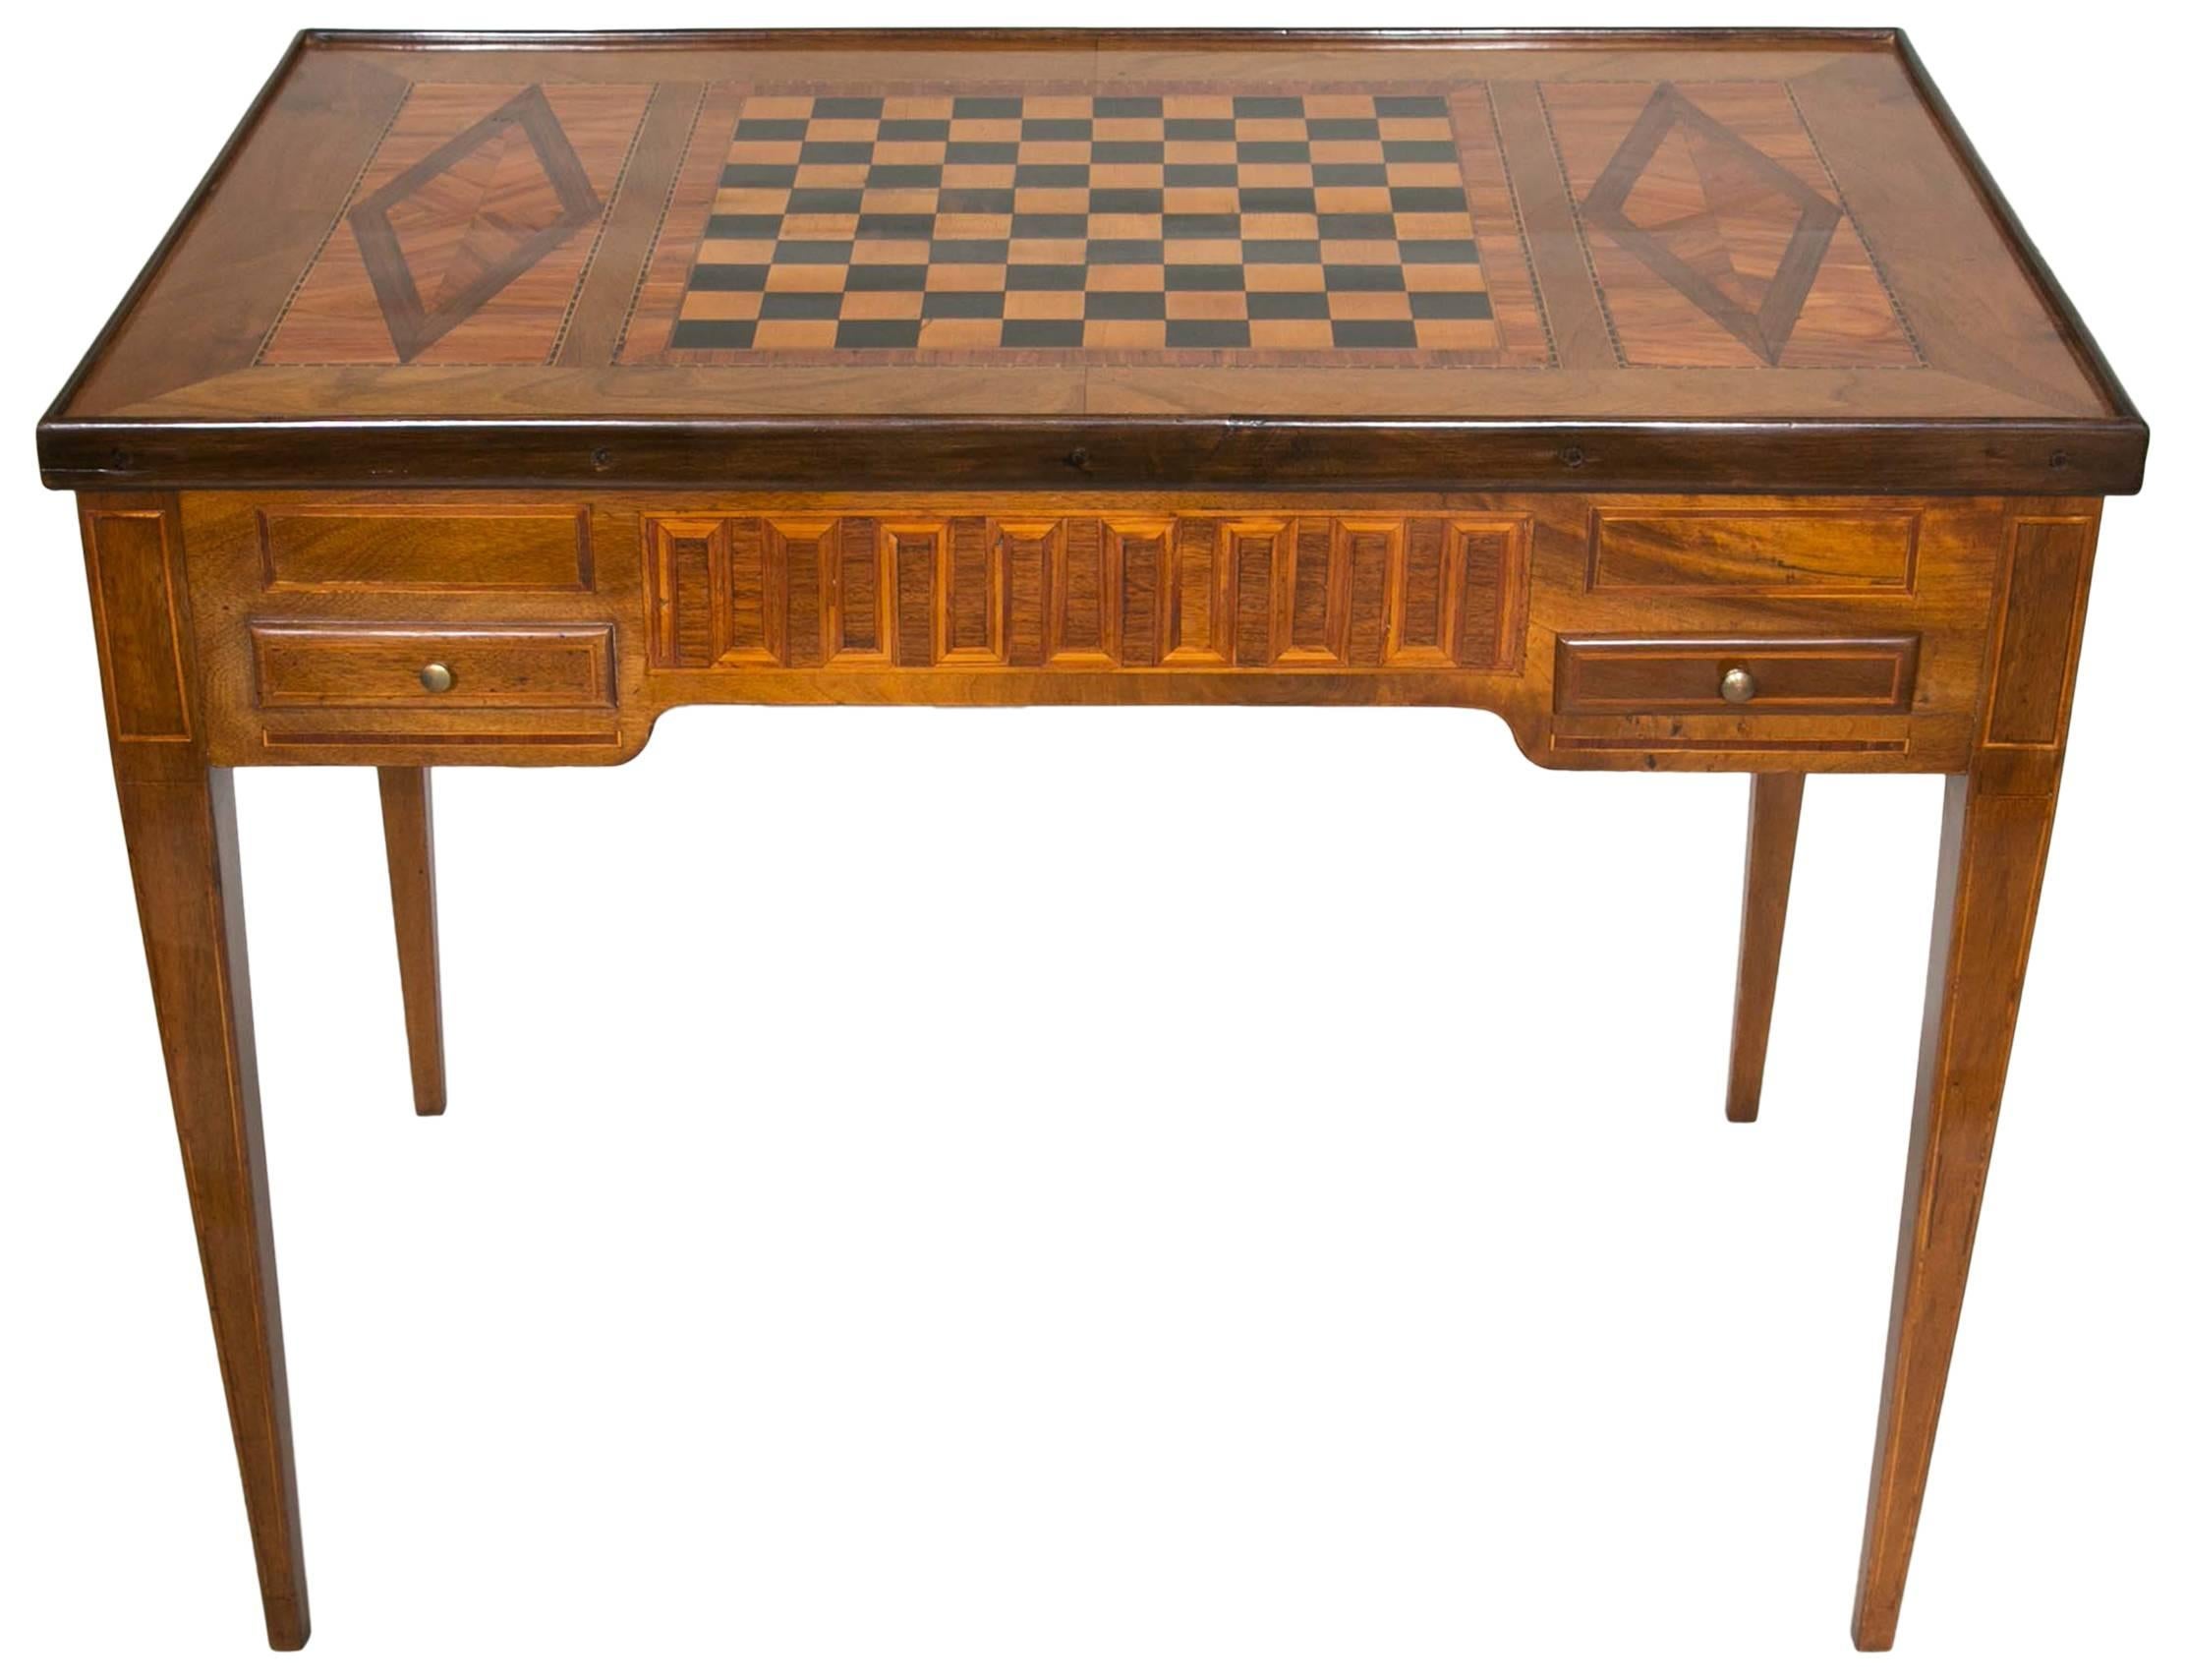 18th Century Games Table in Marquetry of Precious and Rare Woods